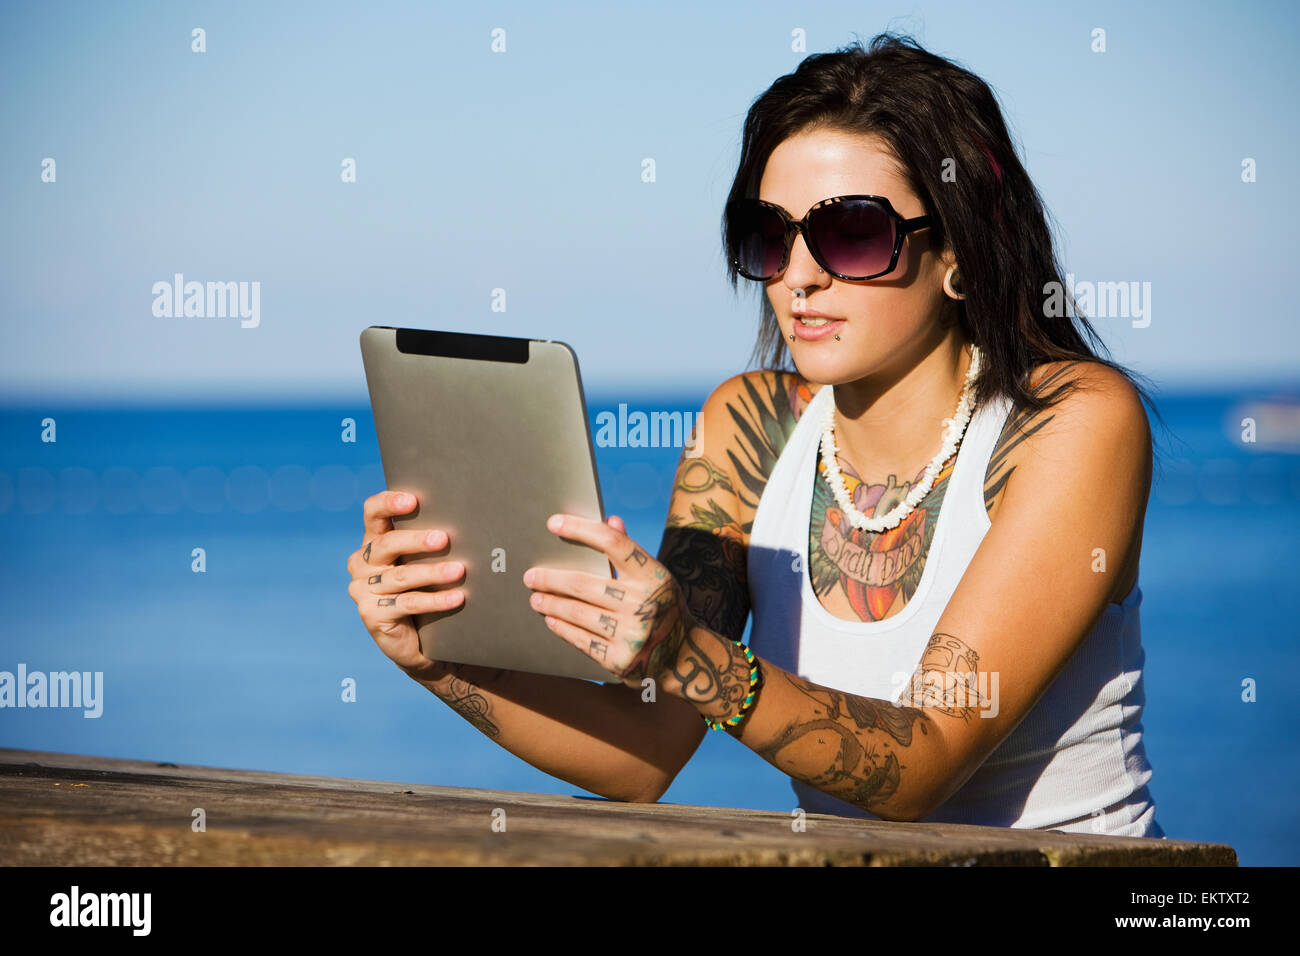 Young woman sitting at a picnic table by a lake using a tablet;Ontario canada Stock Photo